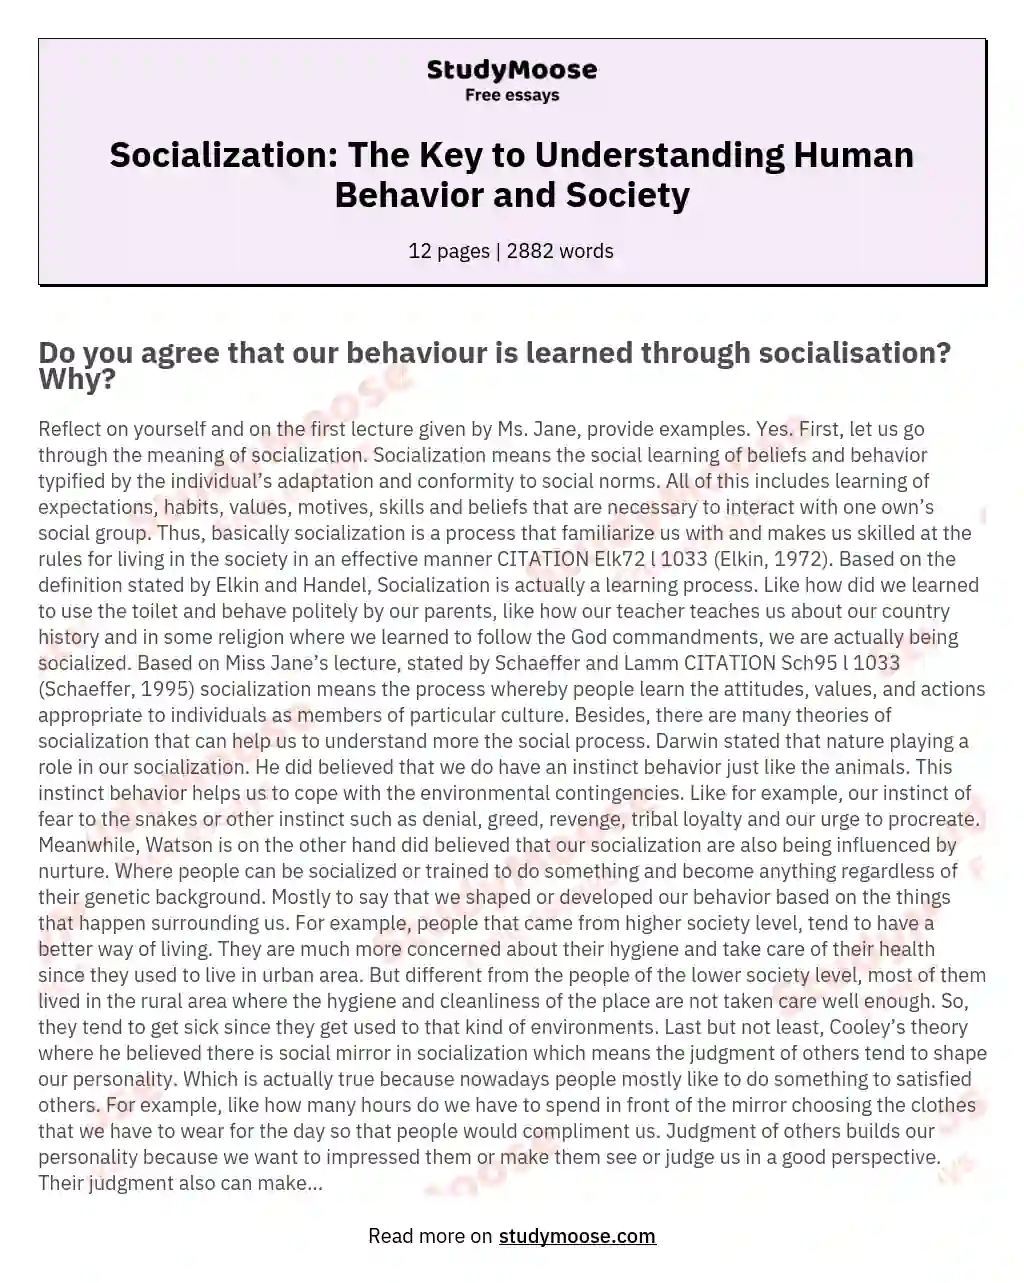 Socialization: The Key to Understanding Human Behavior and Society essay